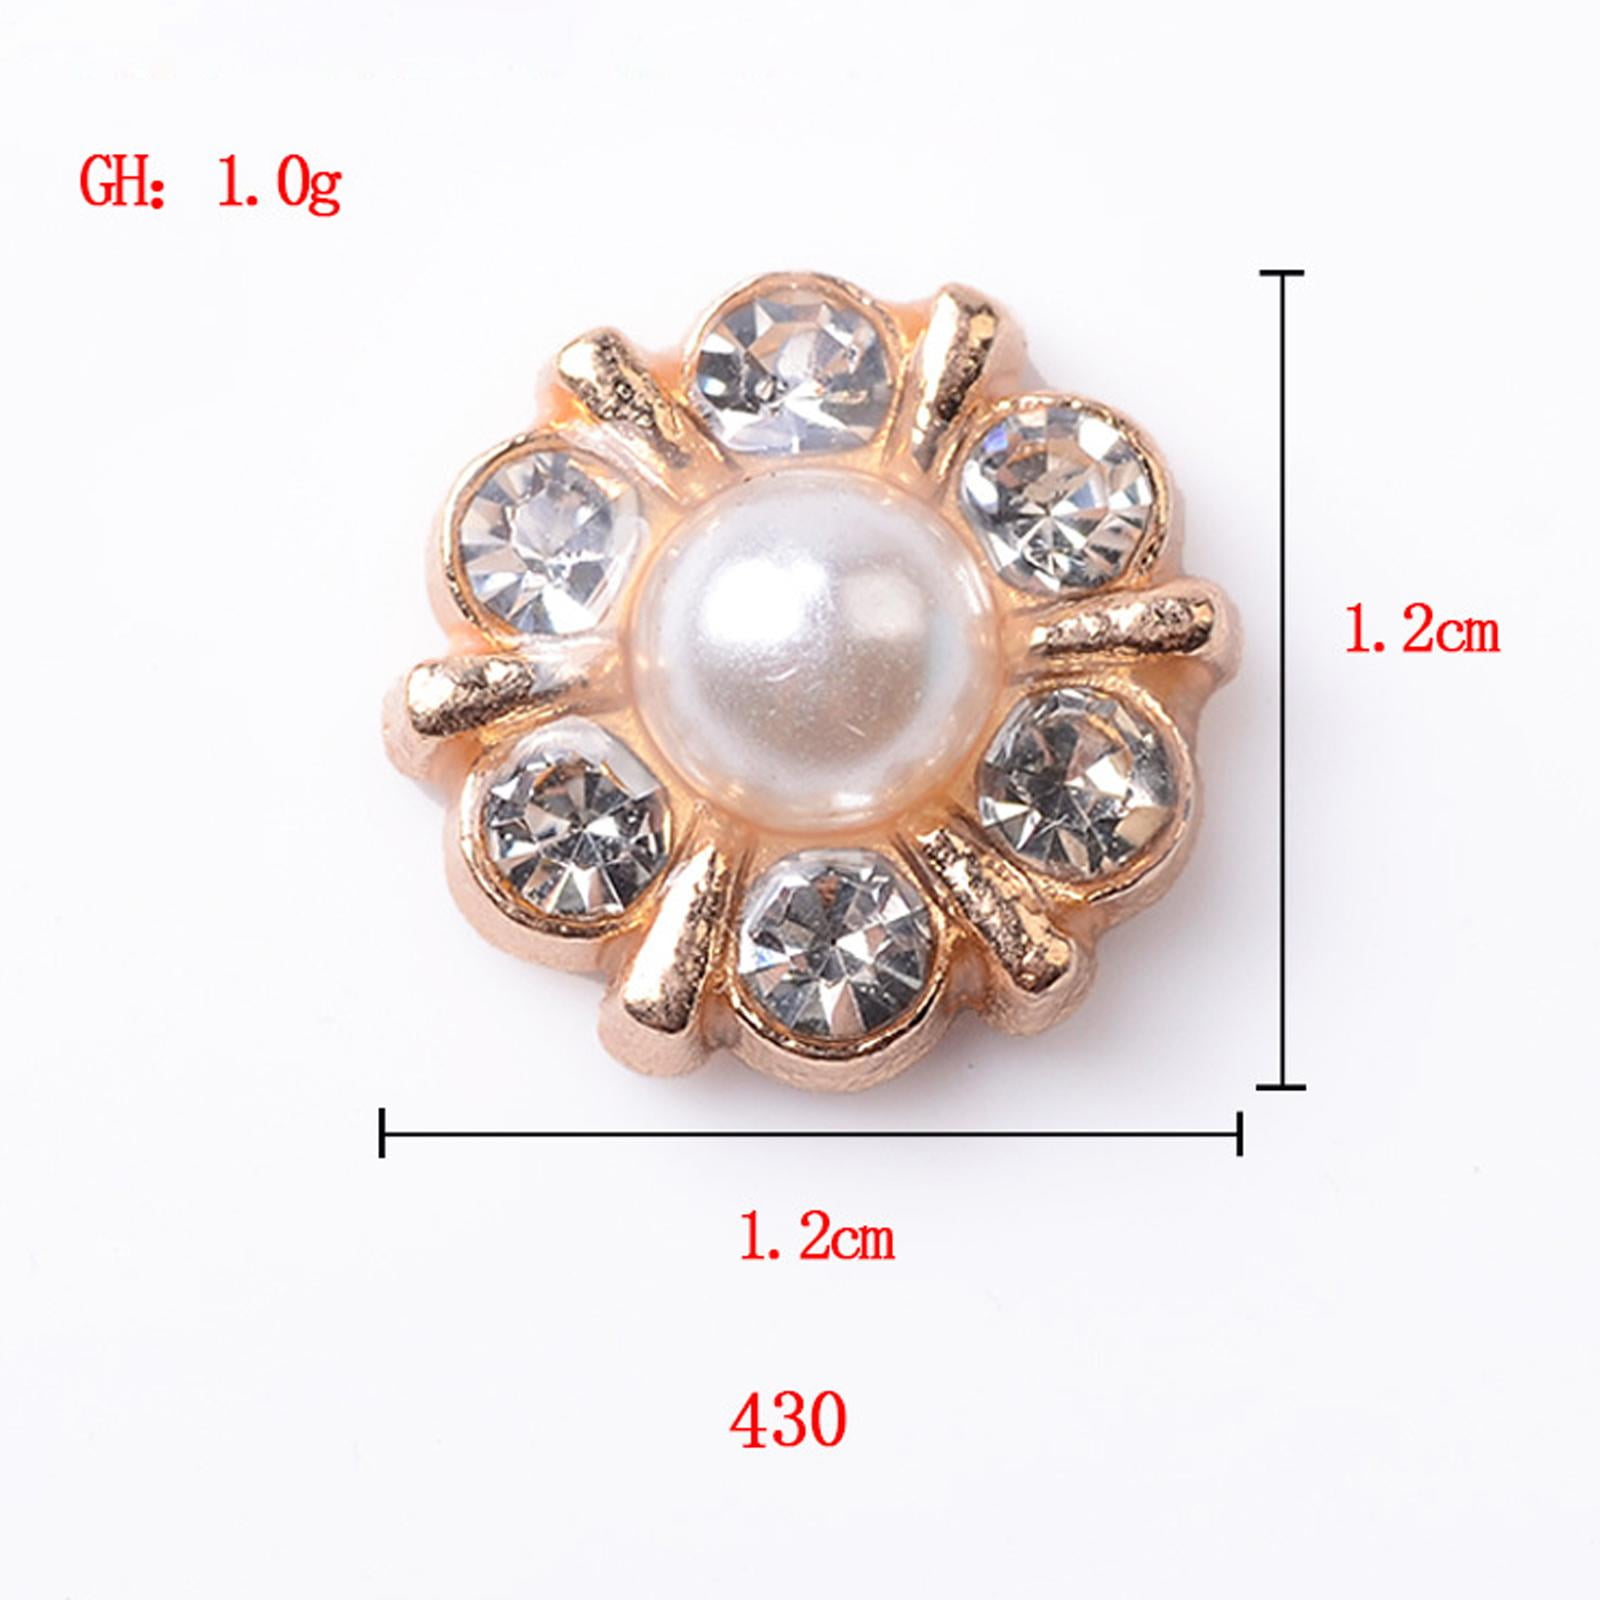 50 Pcs Rhinestone Embellishments Pearl Buttons, 1 Inch Rhinestone Pearl  Buttons Accessory Decoration Set For Jewelry Making Wedding Party Home  Decorat